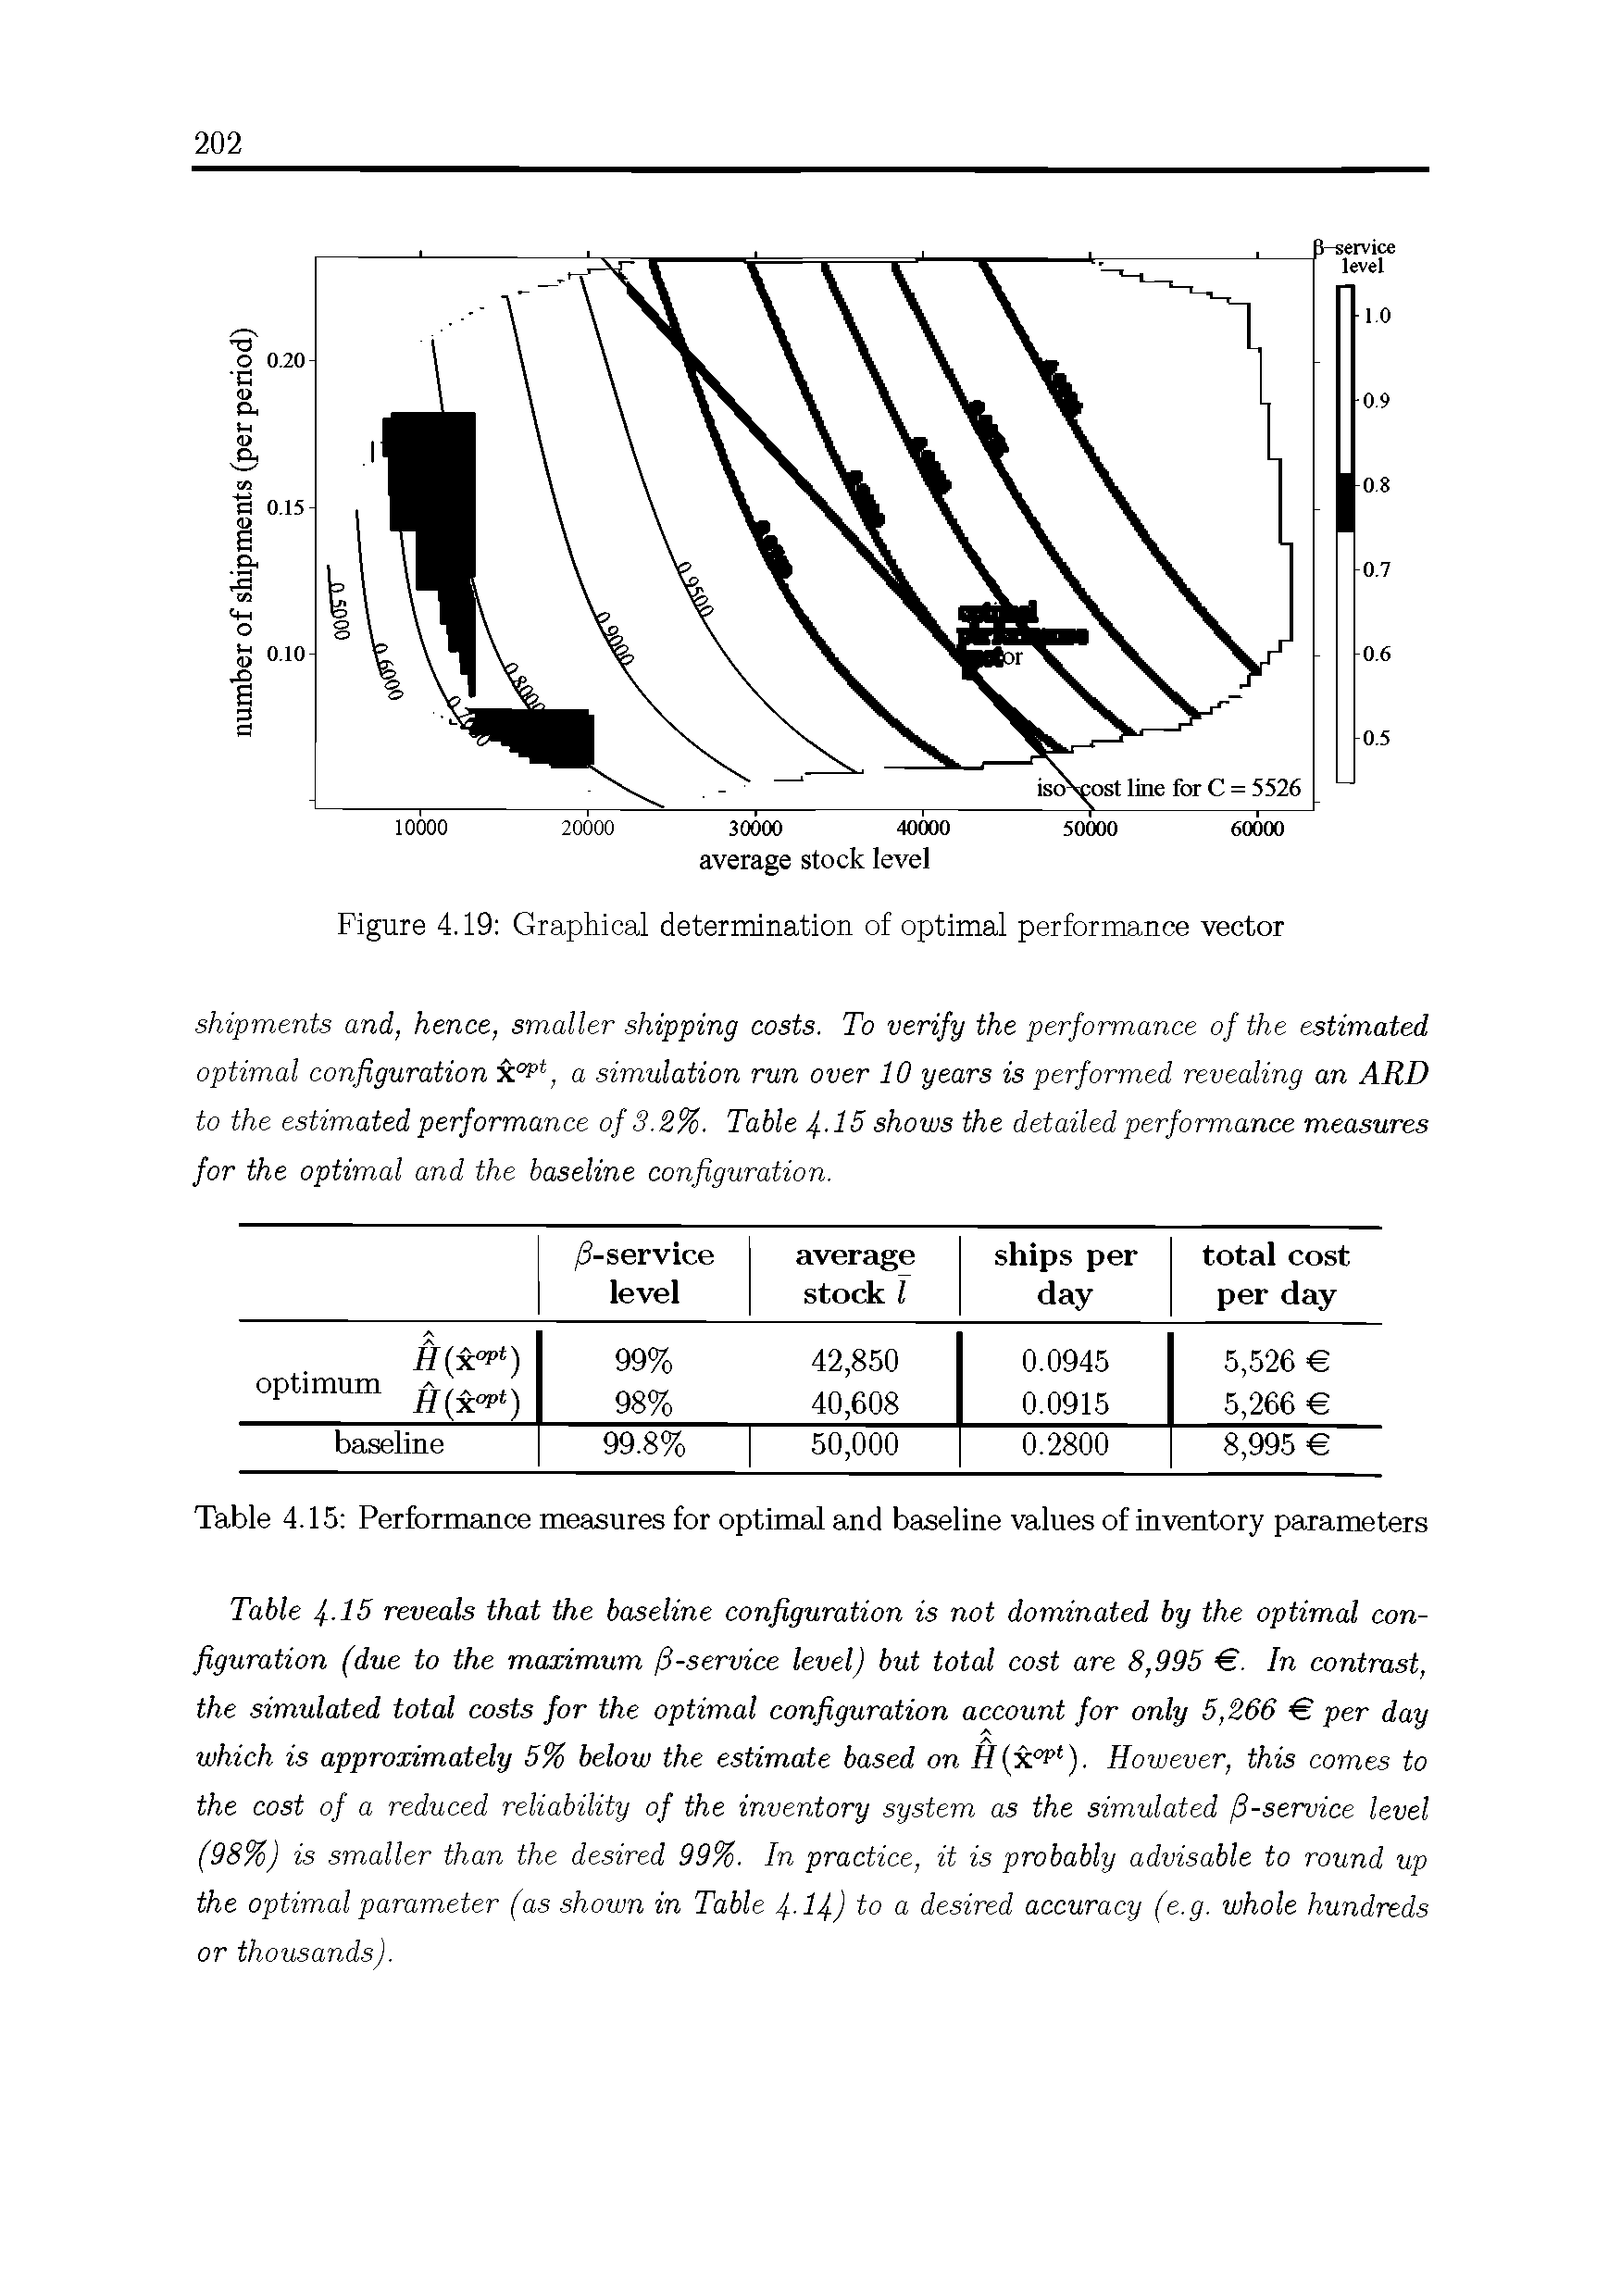 Figure 4.19 Graphical determination of optimal performance vector...